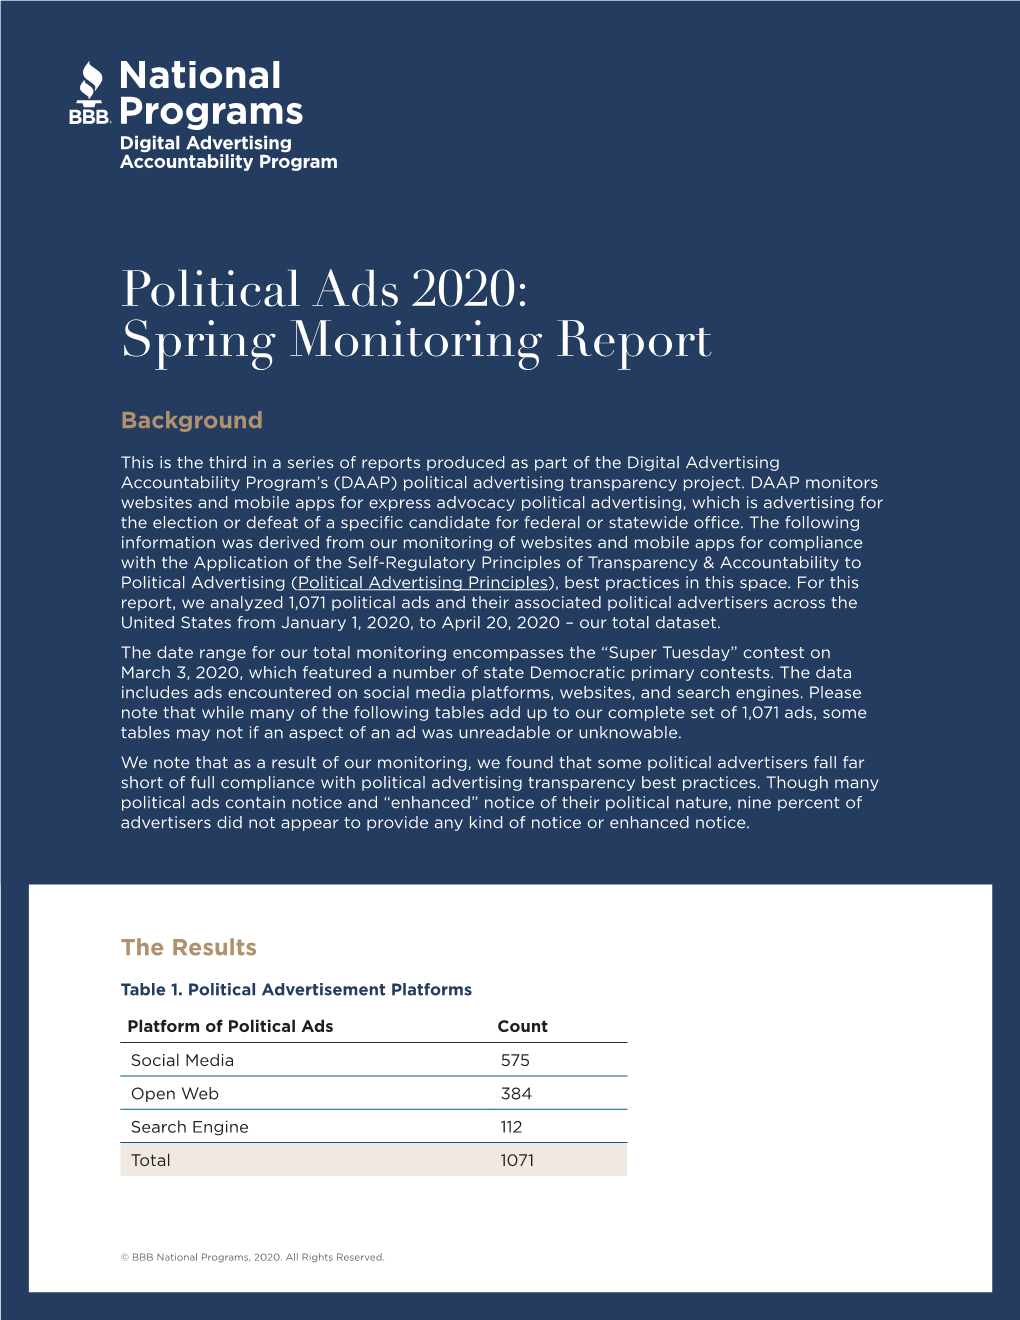 Political Ads 2020: Spring Monitoring Report